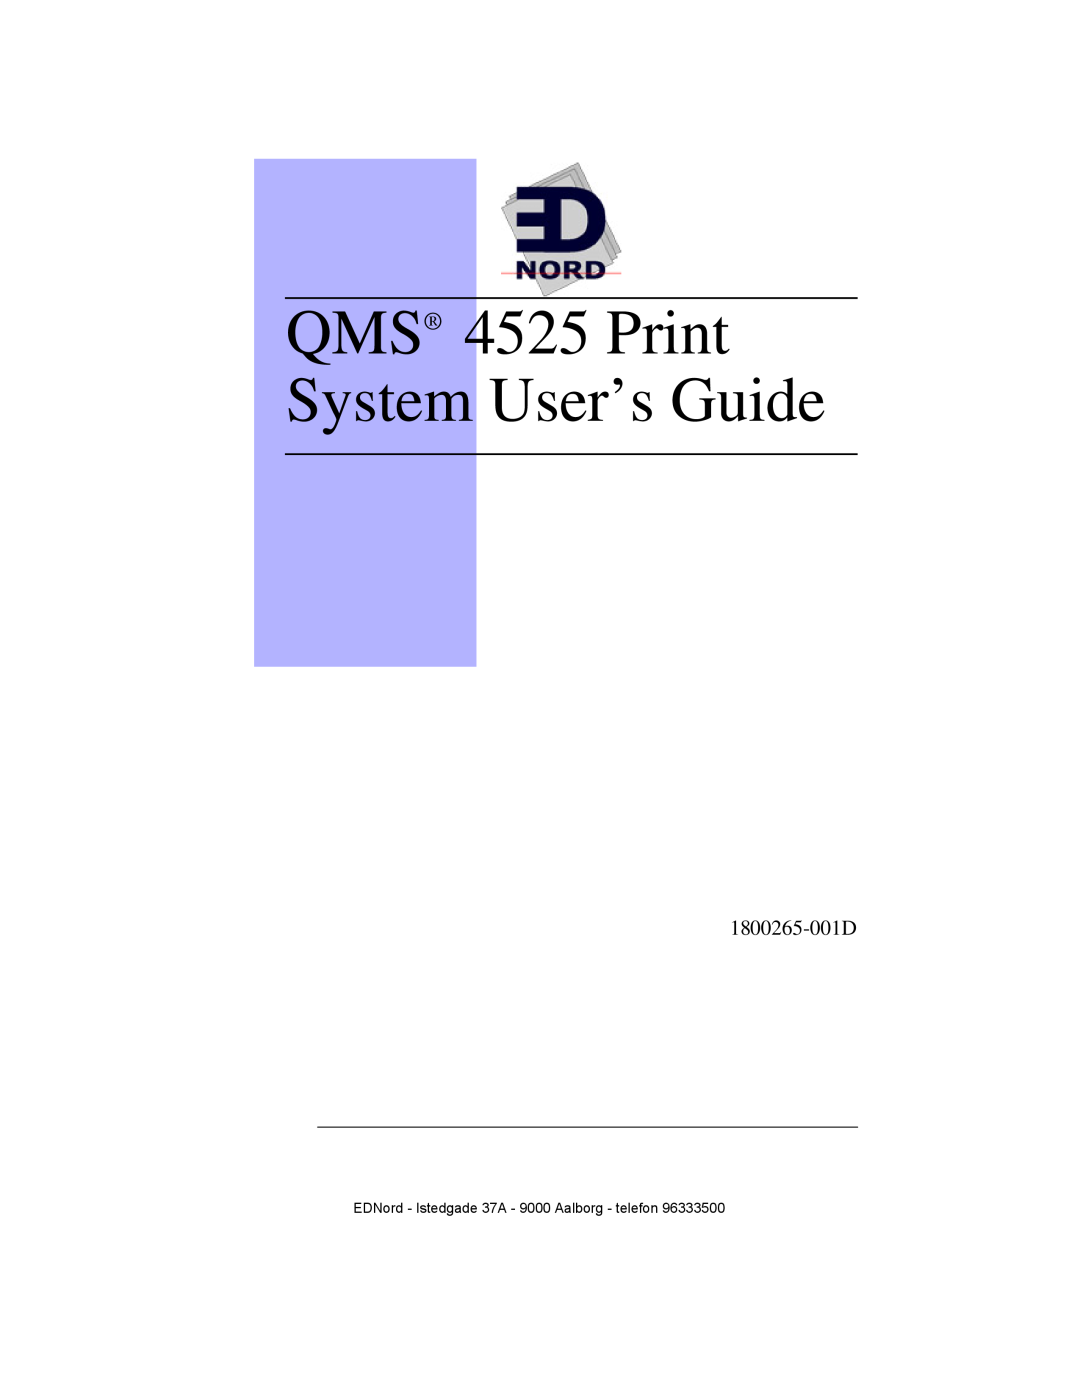 IBM manual QMS 4525 Print System User’s Guide, 1800265-001D, EDNord - Istedgade 37A - 9000 Aalborg - telefon 